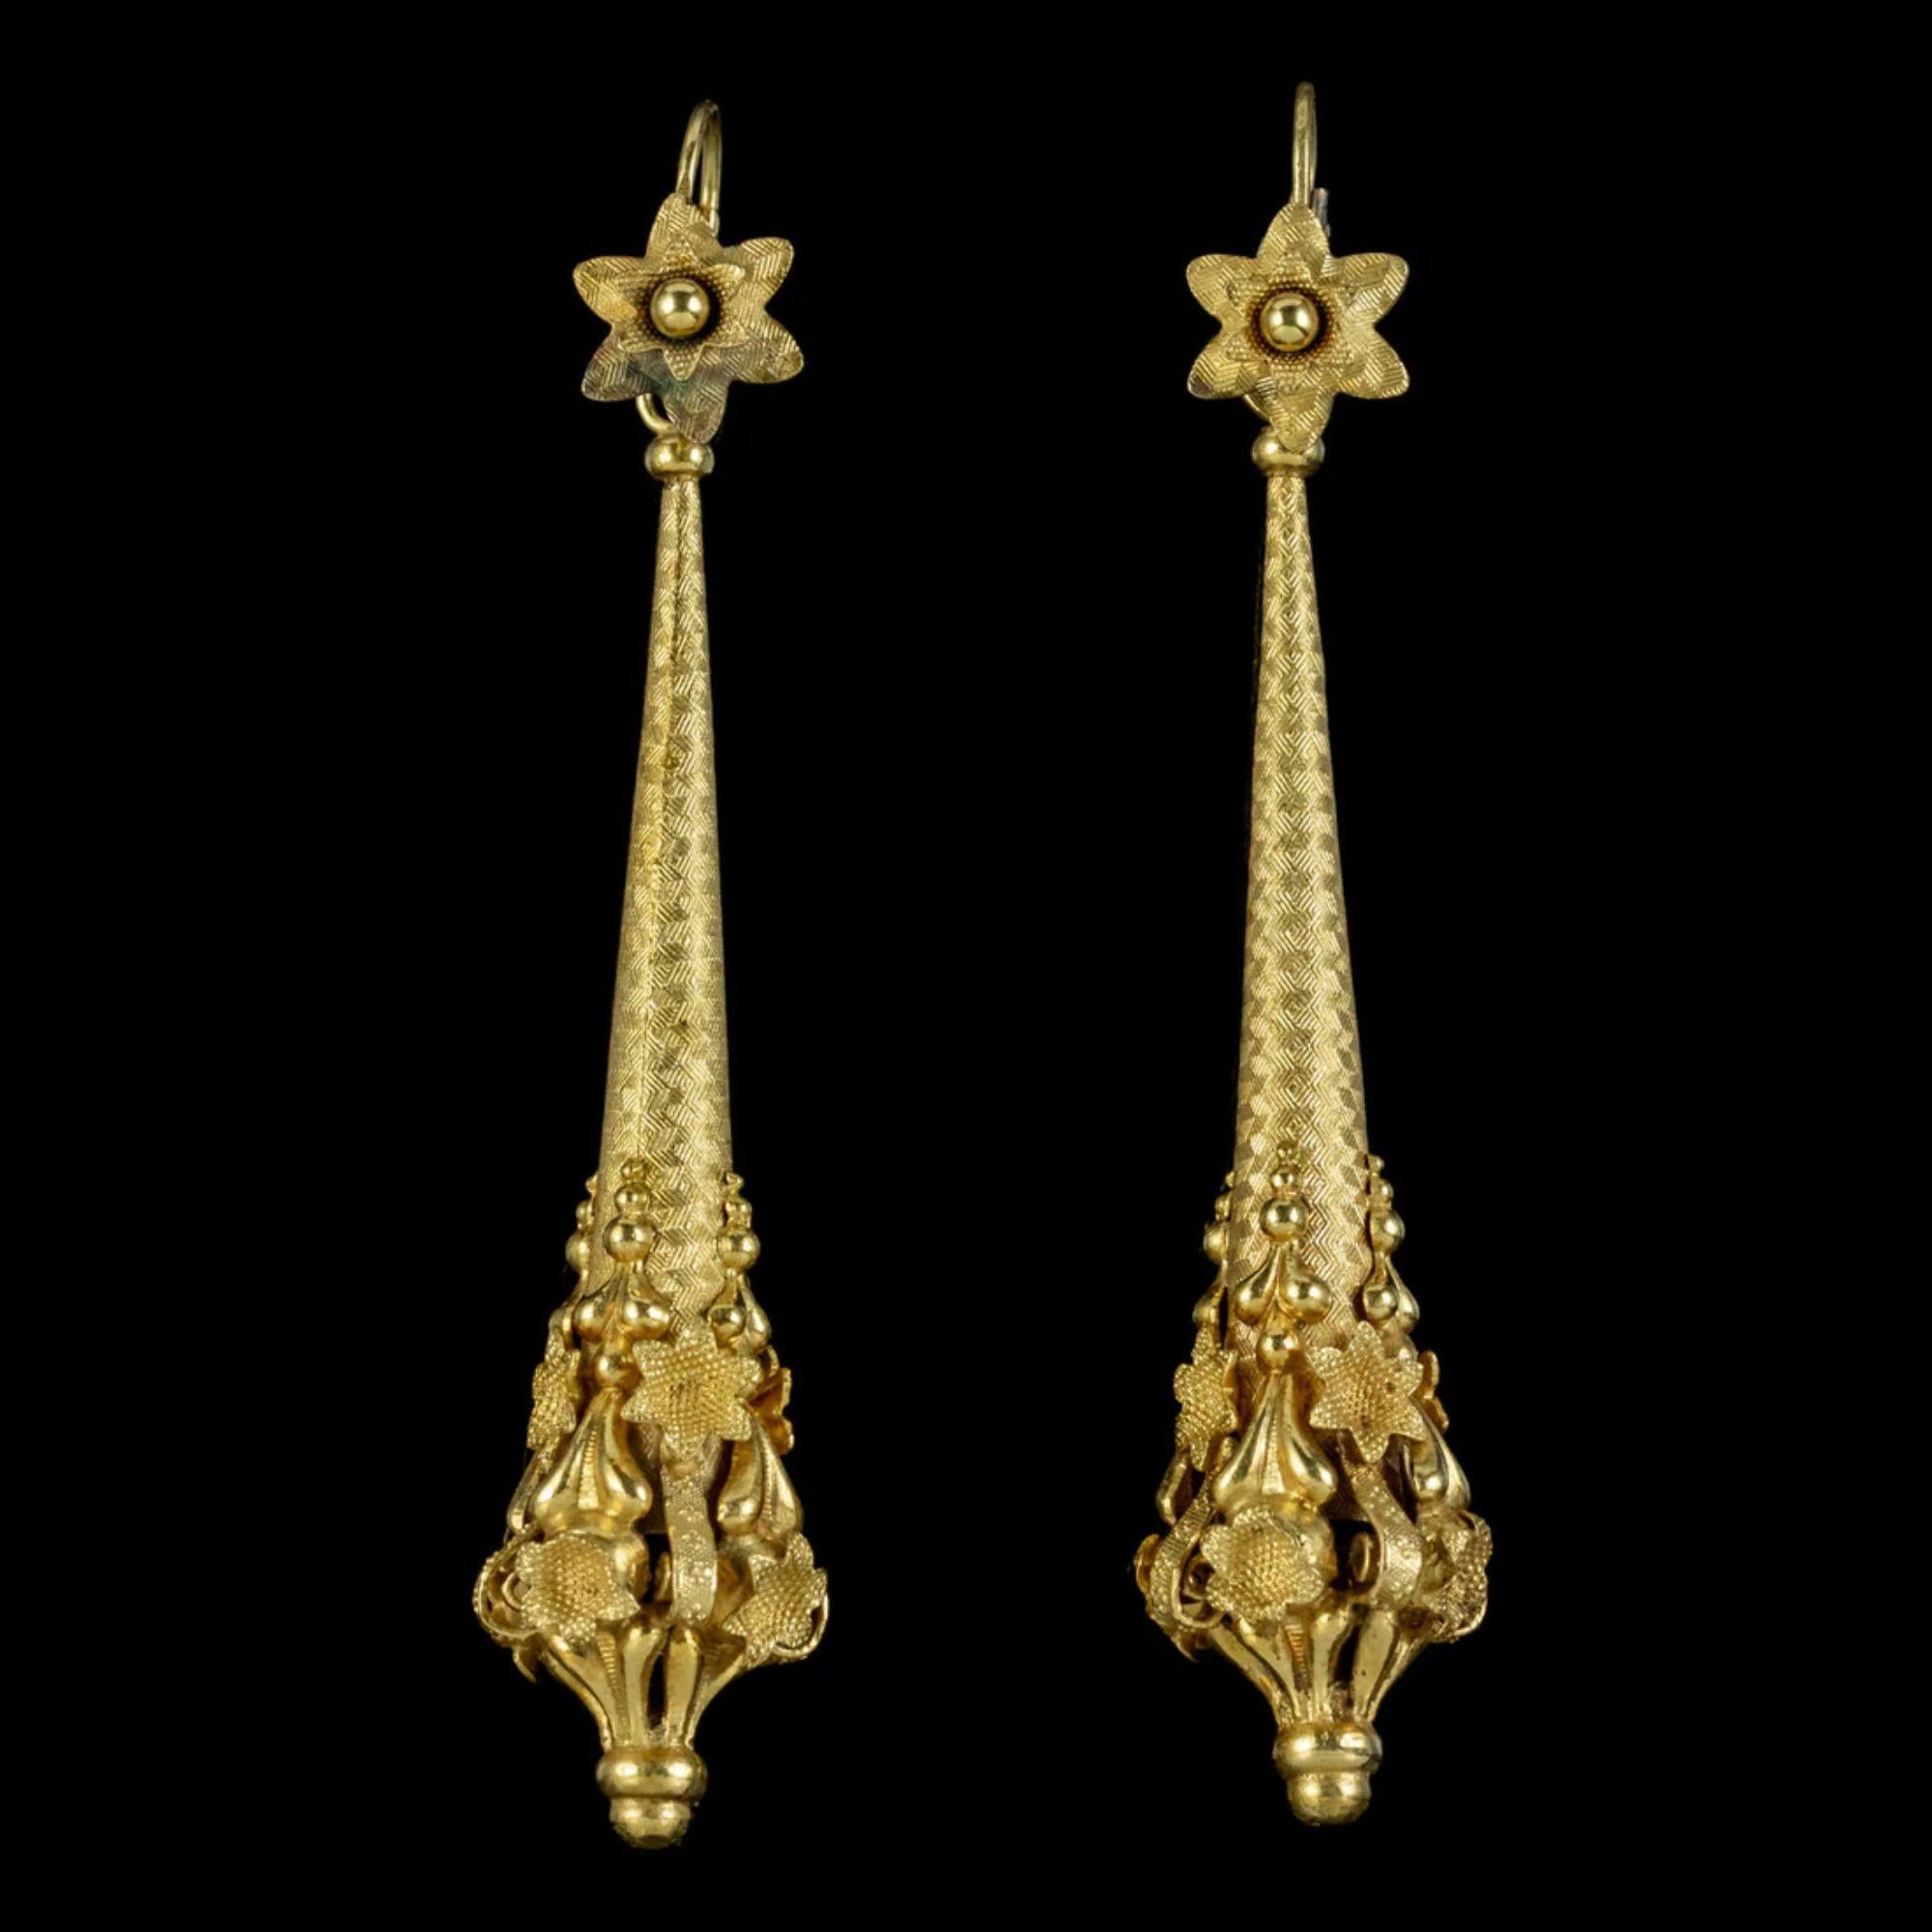 A spectacular pair of antique Georgian night and day earrings from the early 19th Century crafted in pinchbeck and gilded in 18ct yellow gold. 

The long droppers are chased with a fabulous chevron pattern and lead to ornate, cannetille metalwork at